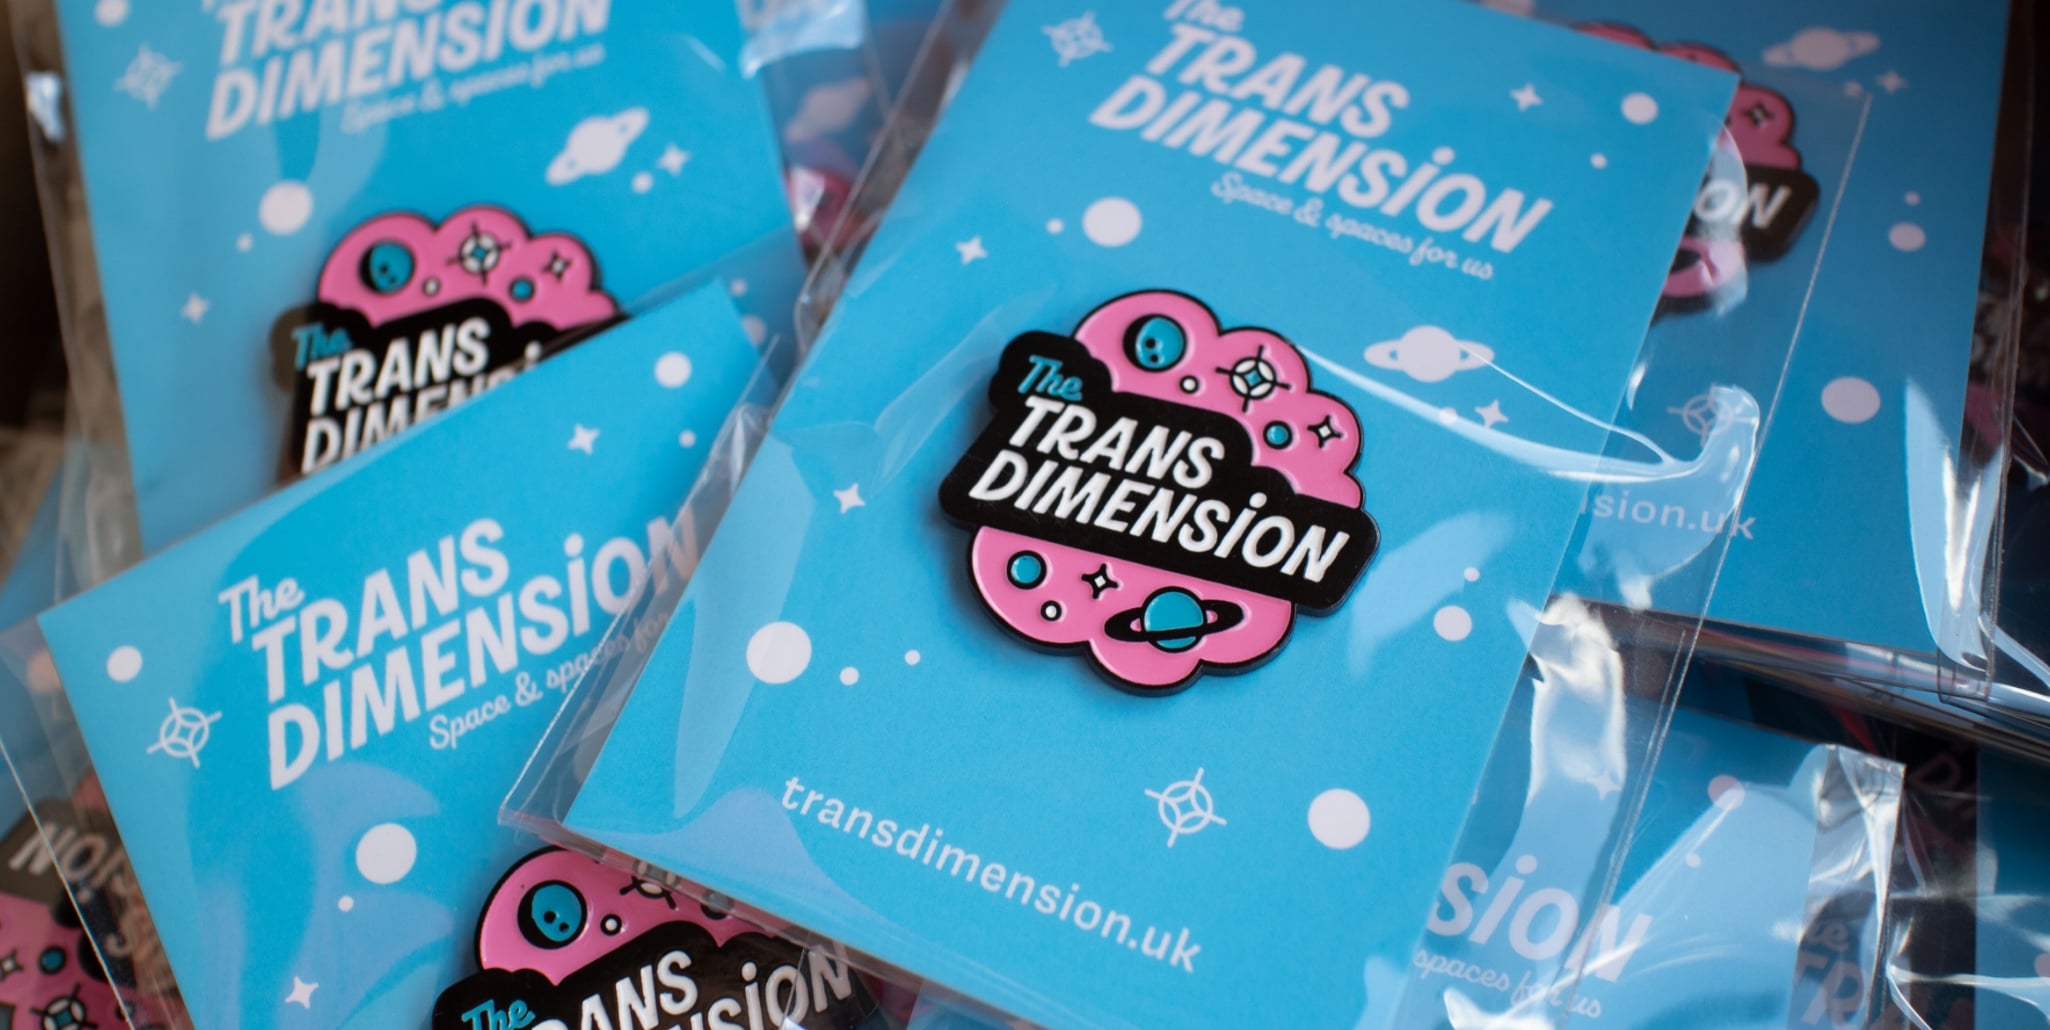 A photograph of The Trans Dimension pin badges